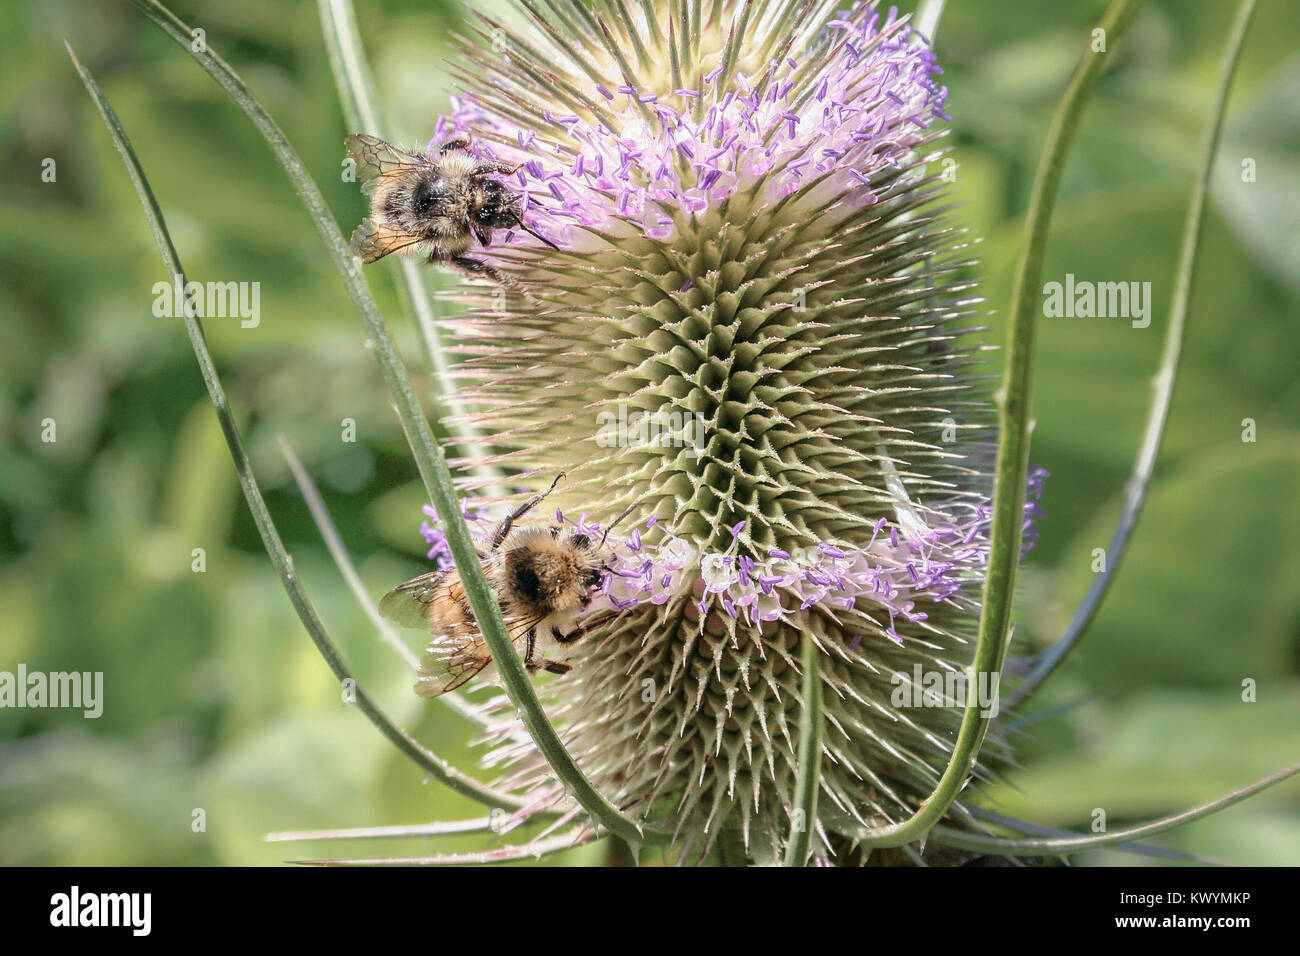 Against a blurred green background, two bumblebees probe the tubular purple flowers of a spiky common teasel head, feeding on the plant's nectar. Stock Photo